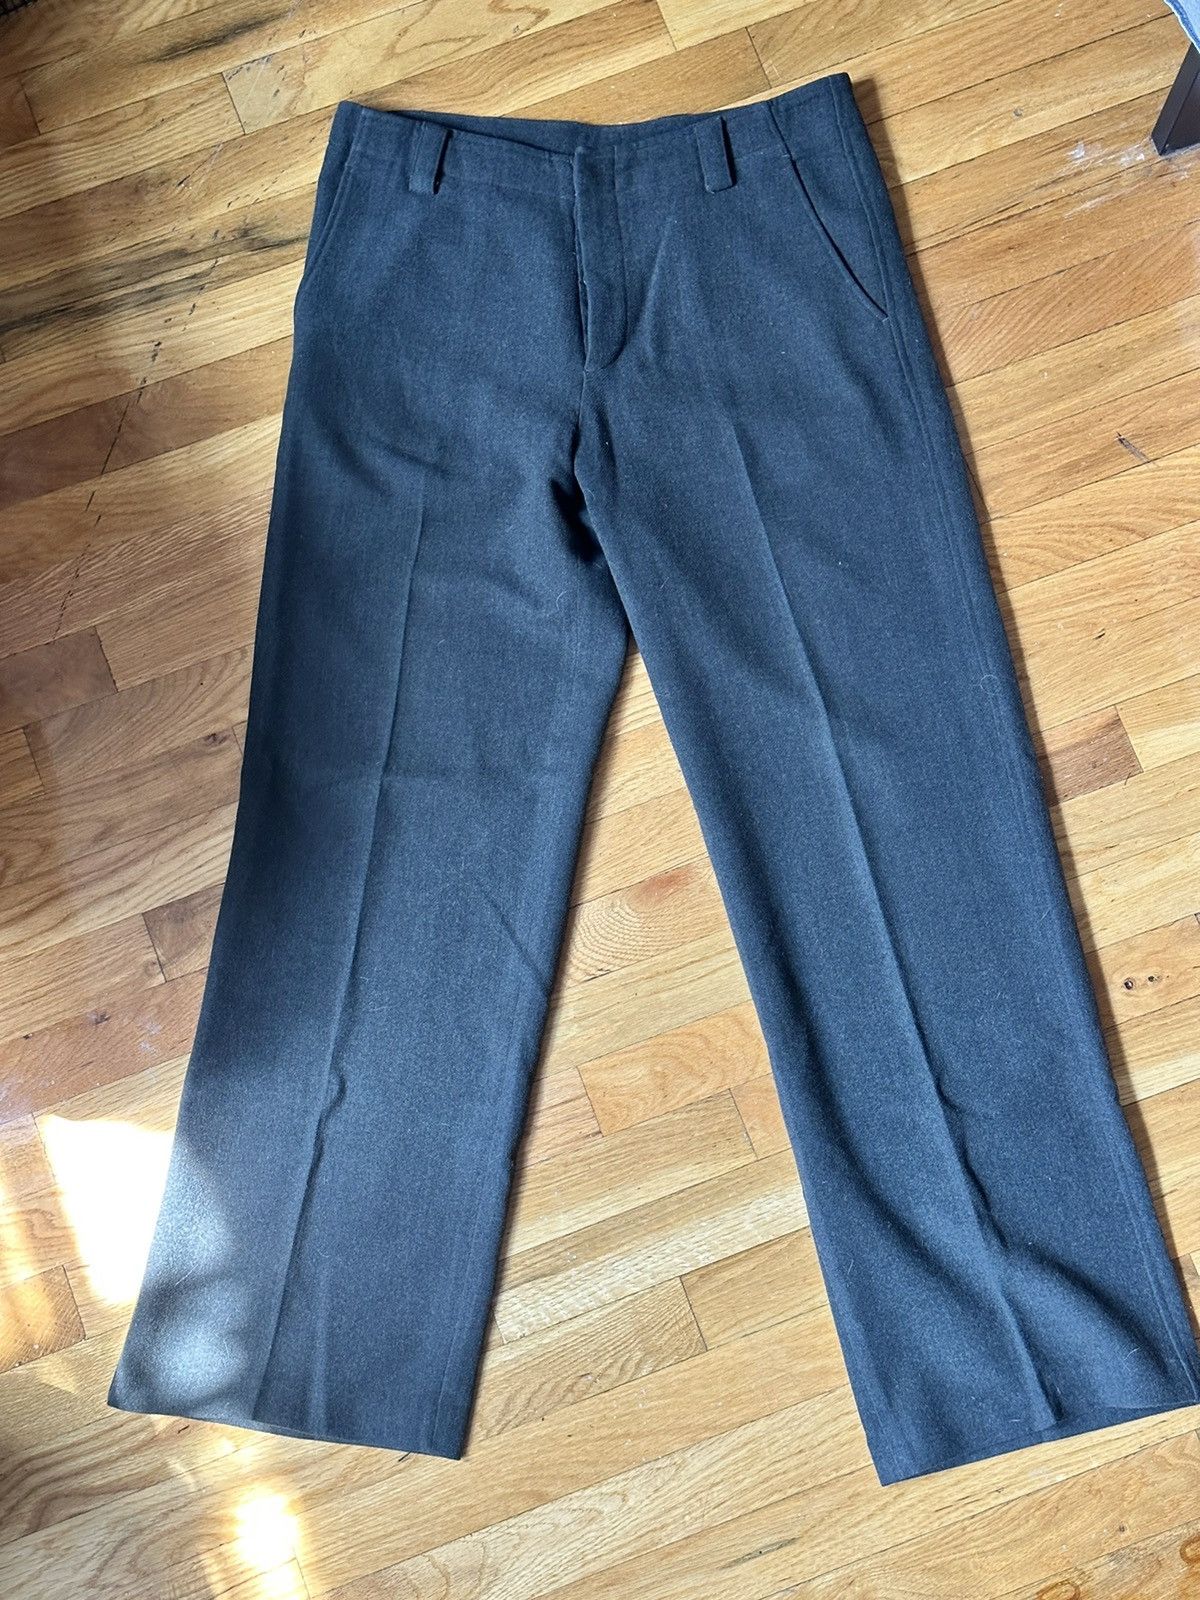 Theory Theory Green Military Pants | Grailed